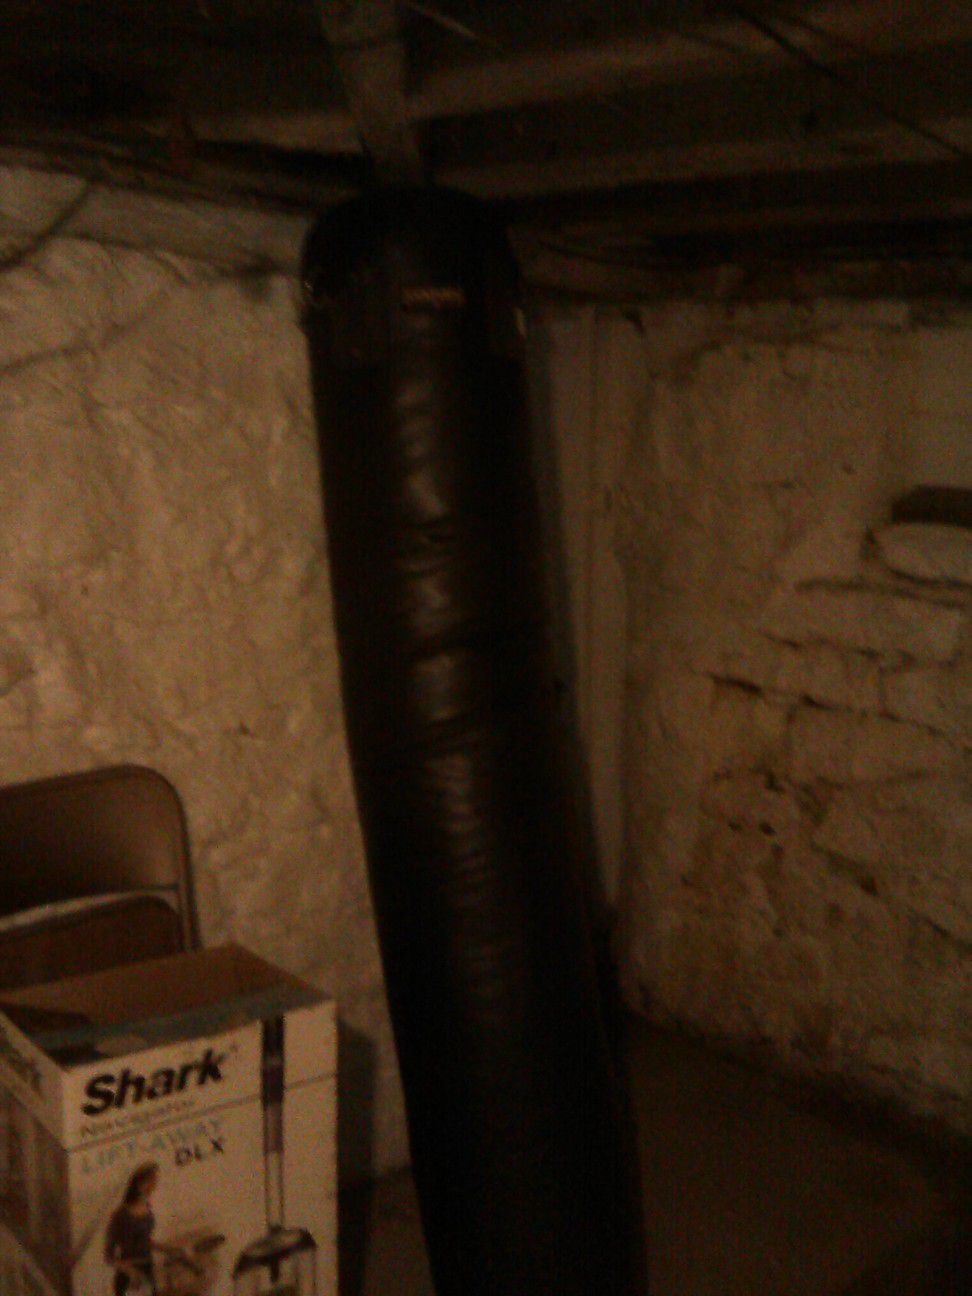 Kick box. Punch bag. At least 6 ft long with pair head gear